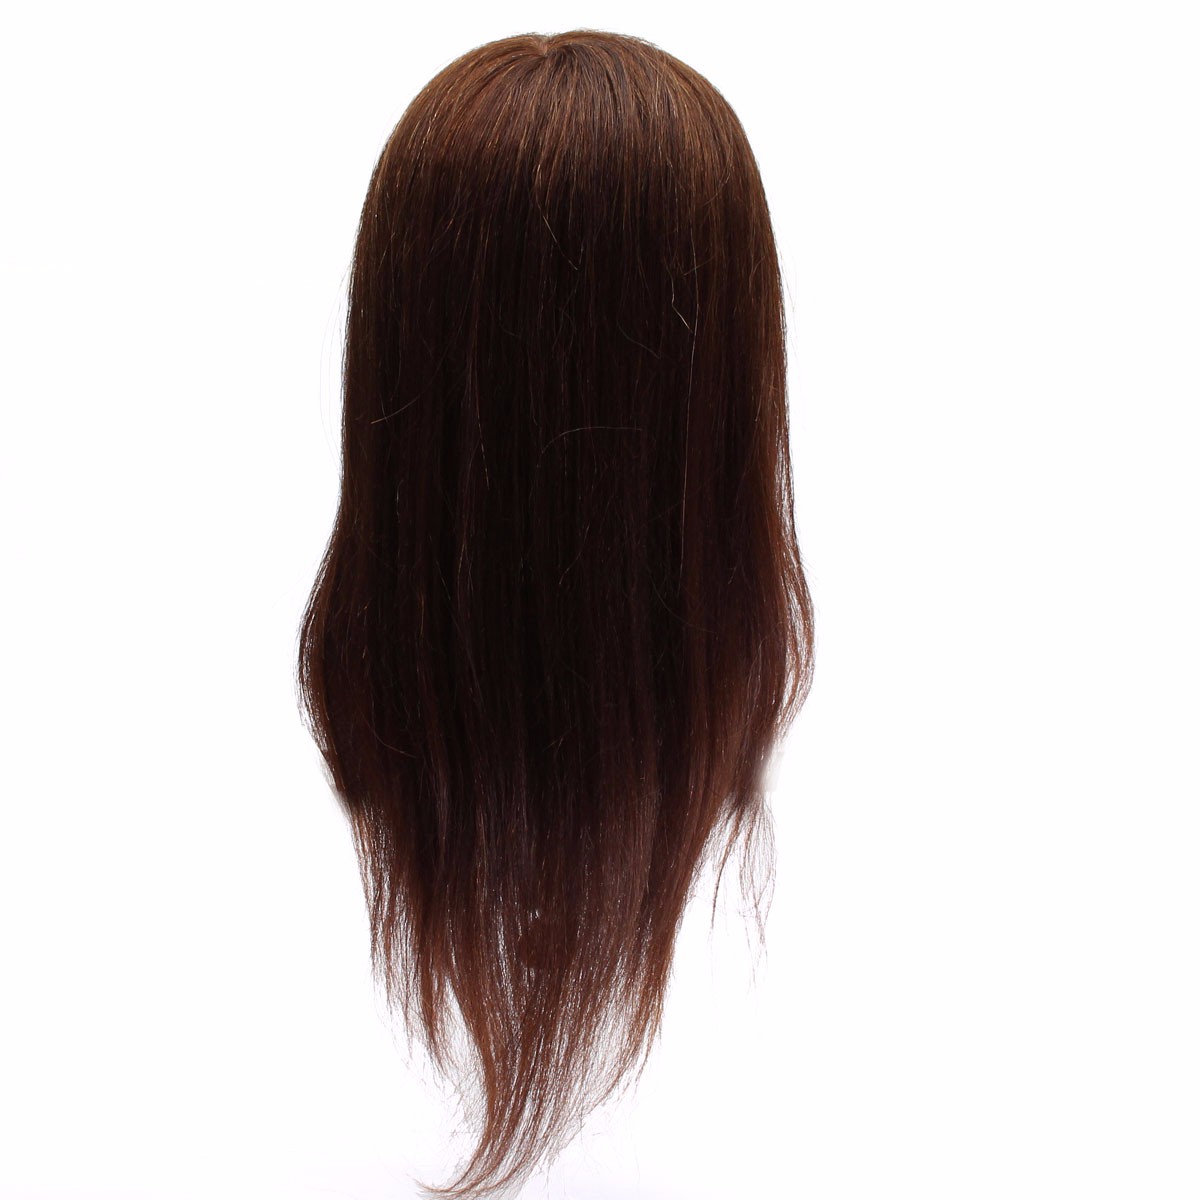 20quot-Brown-90-Human-Hair-Hairdressing-Training-Head-Mannequin-Model-Braiding-Practice-Salon-Clamp-1111877